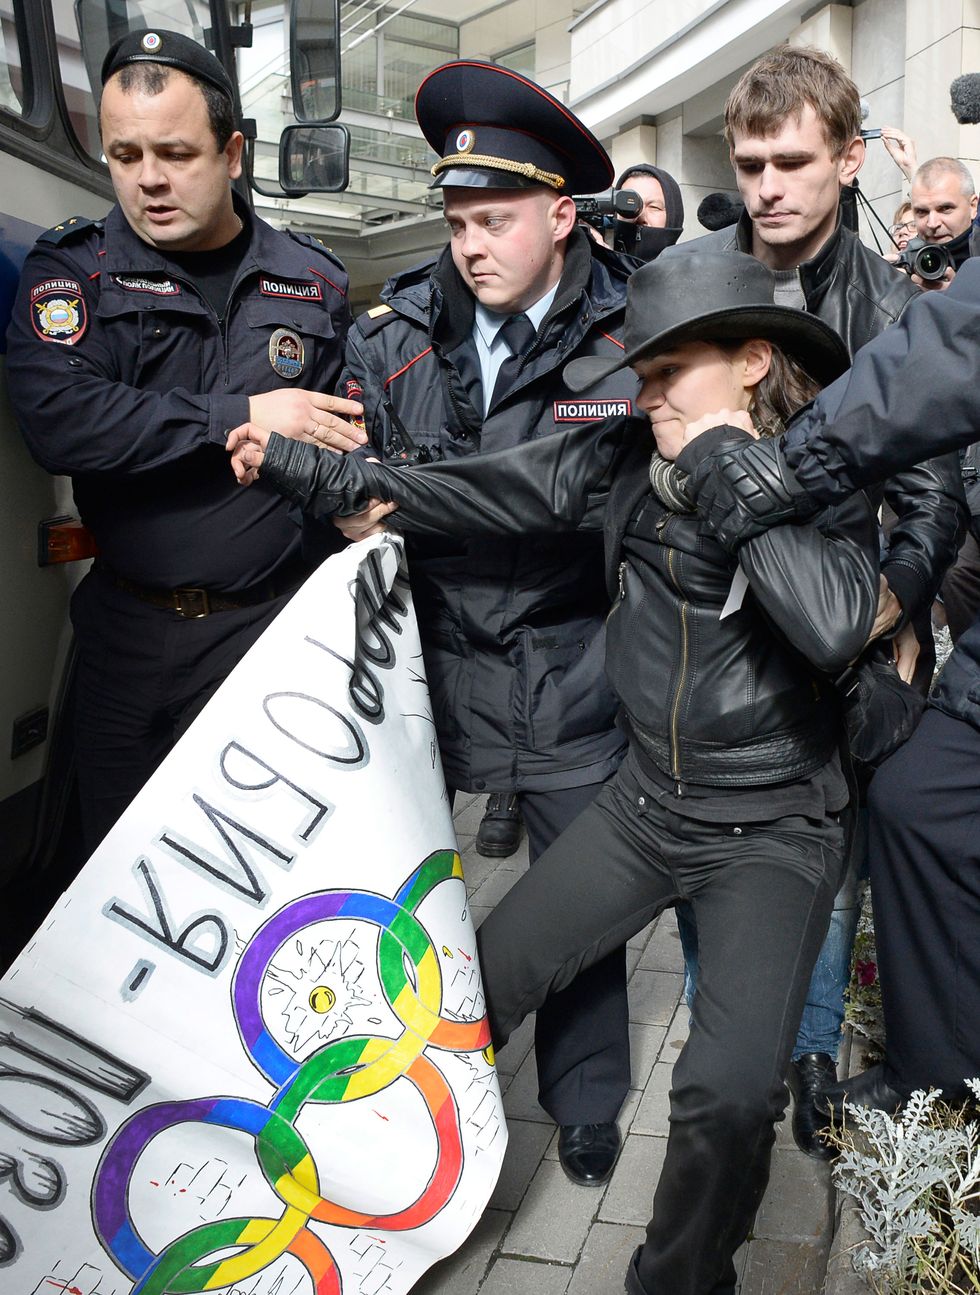 Russian police have famously detained a number of LGBT protesters